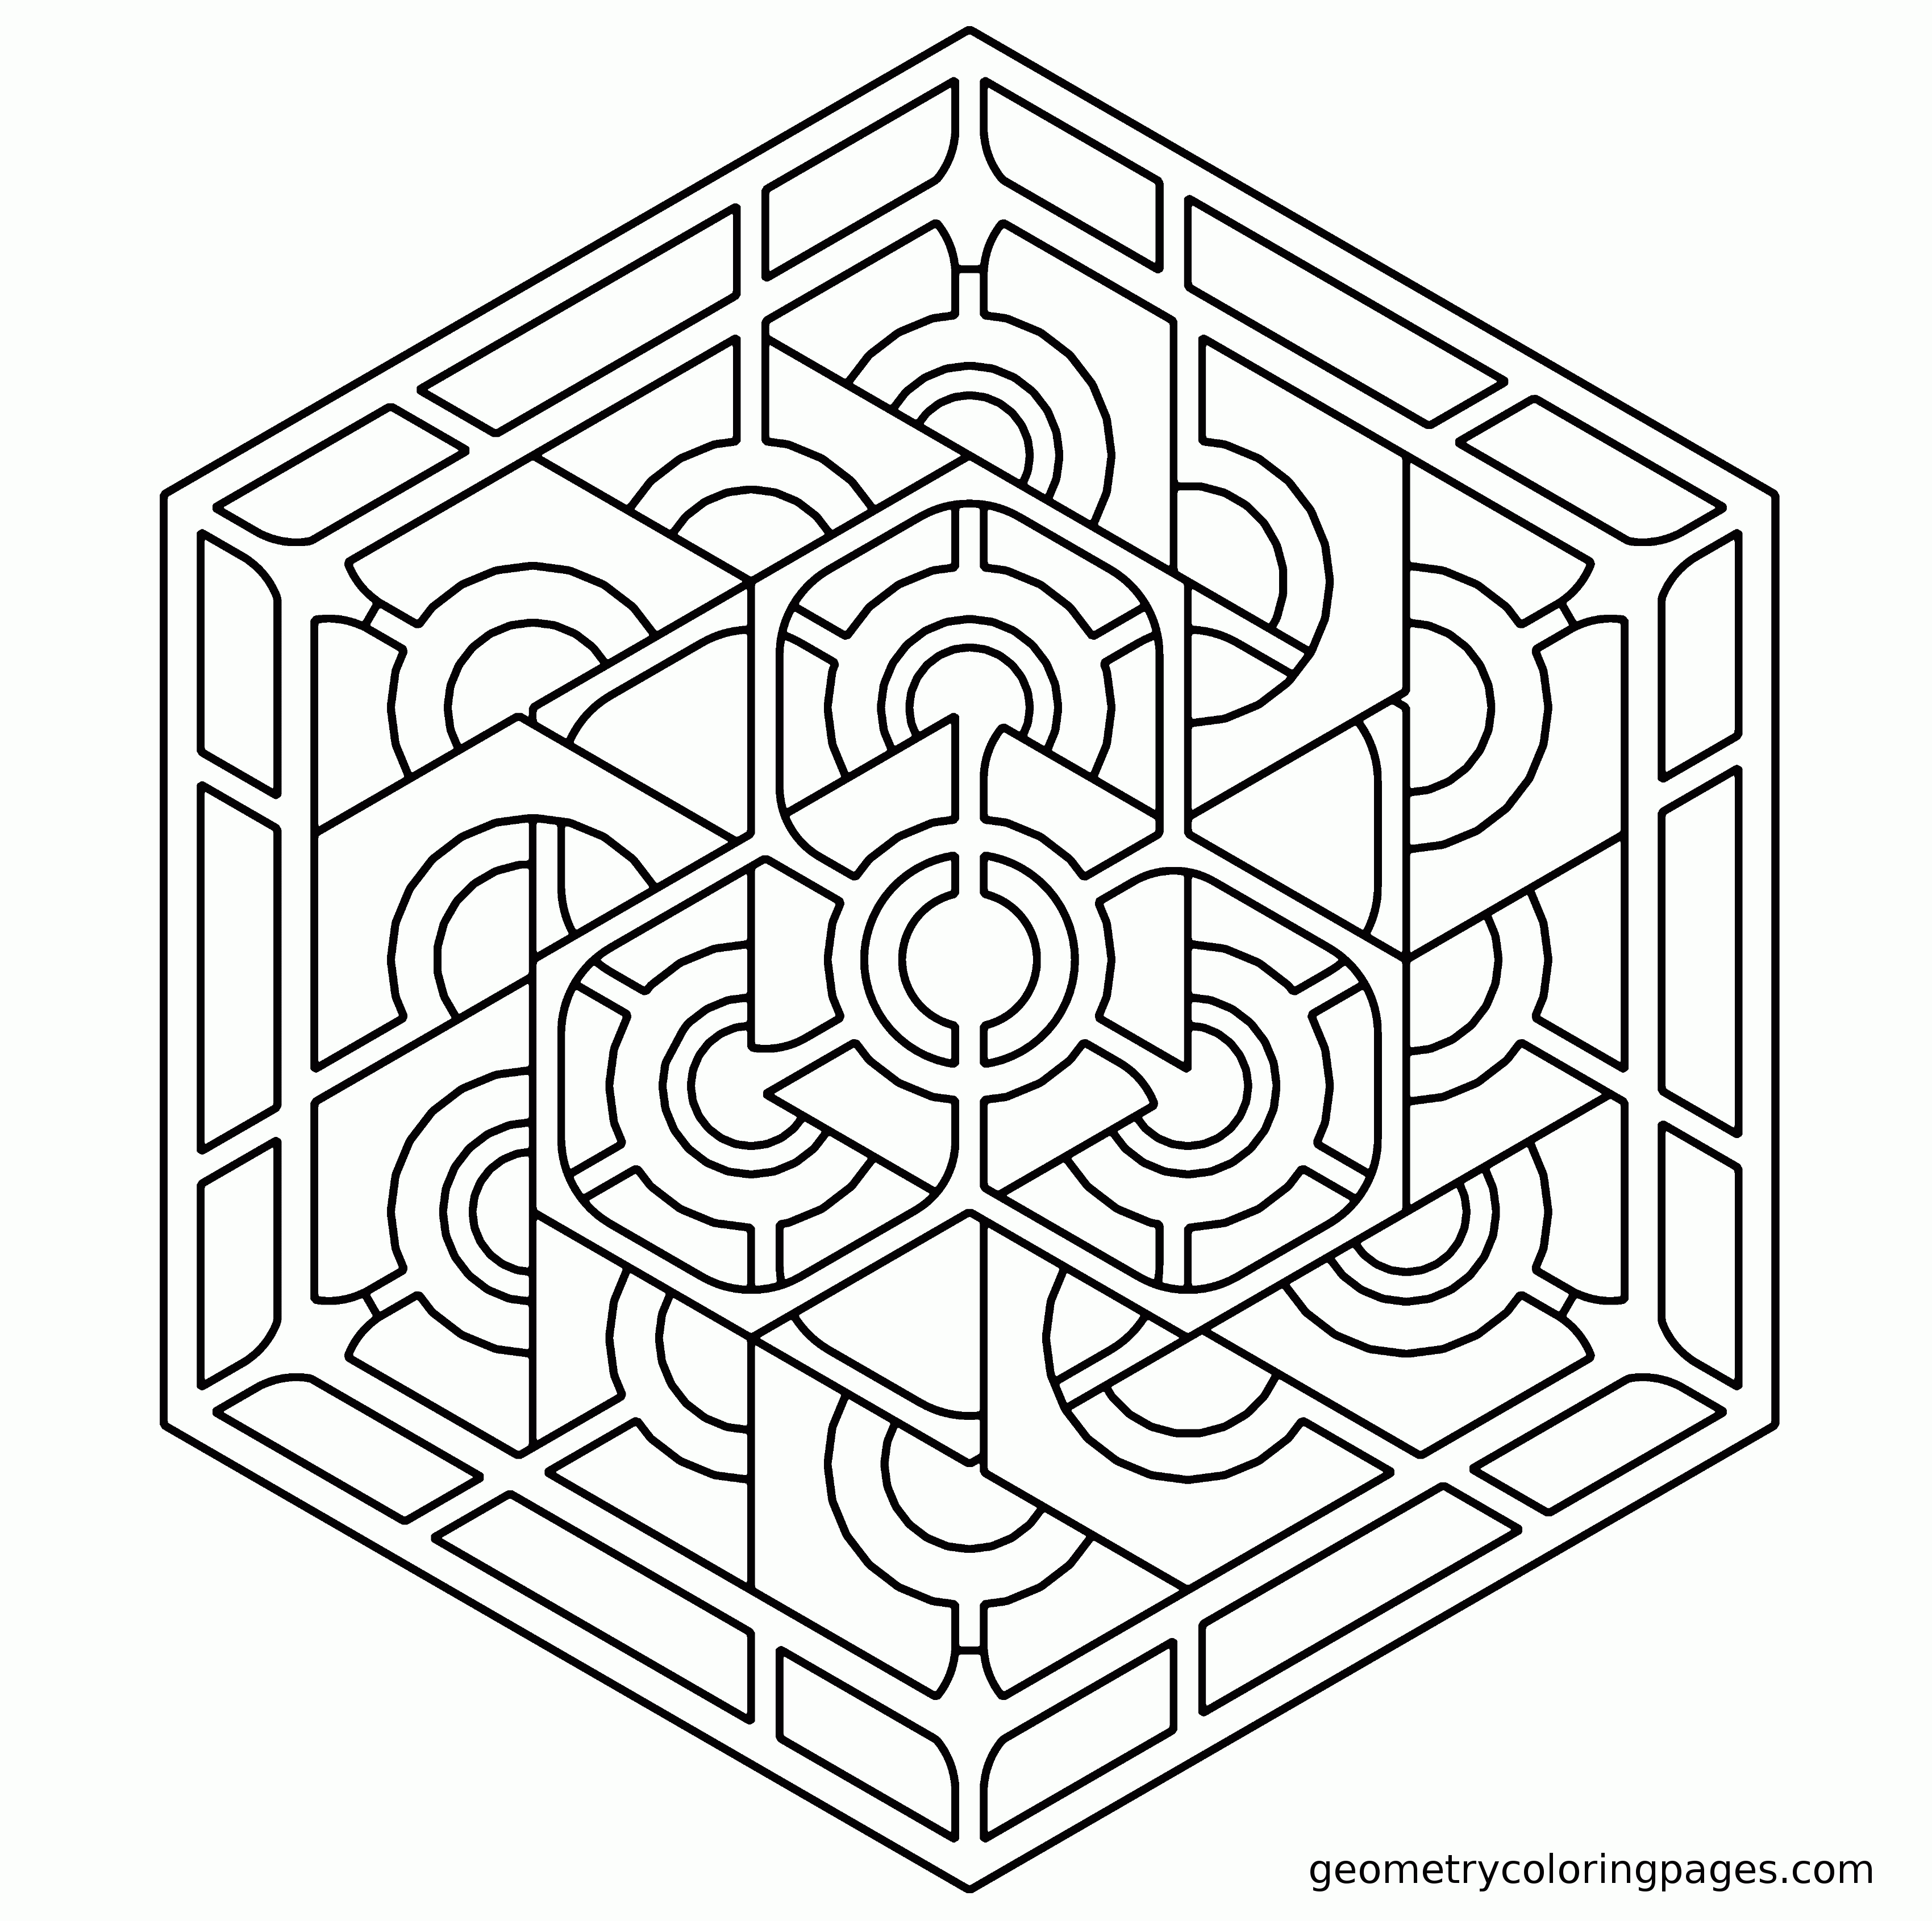 Top geometric coloring pages - nicecoloring.xyz